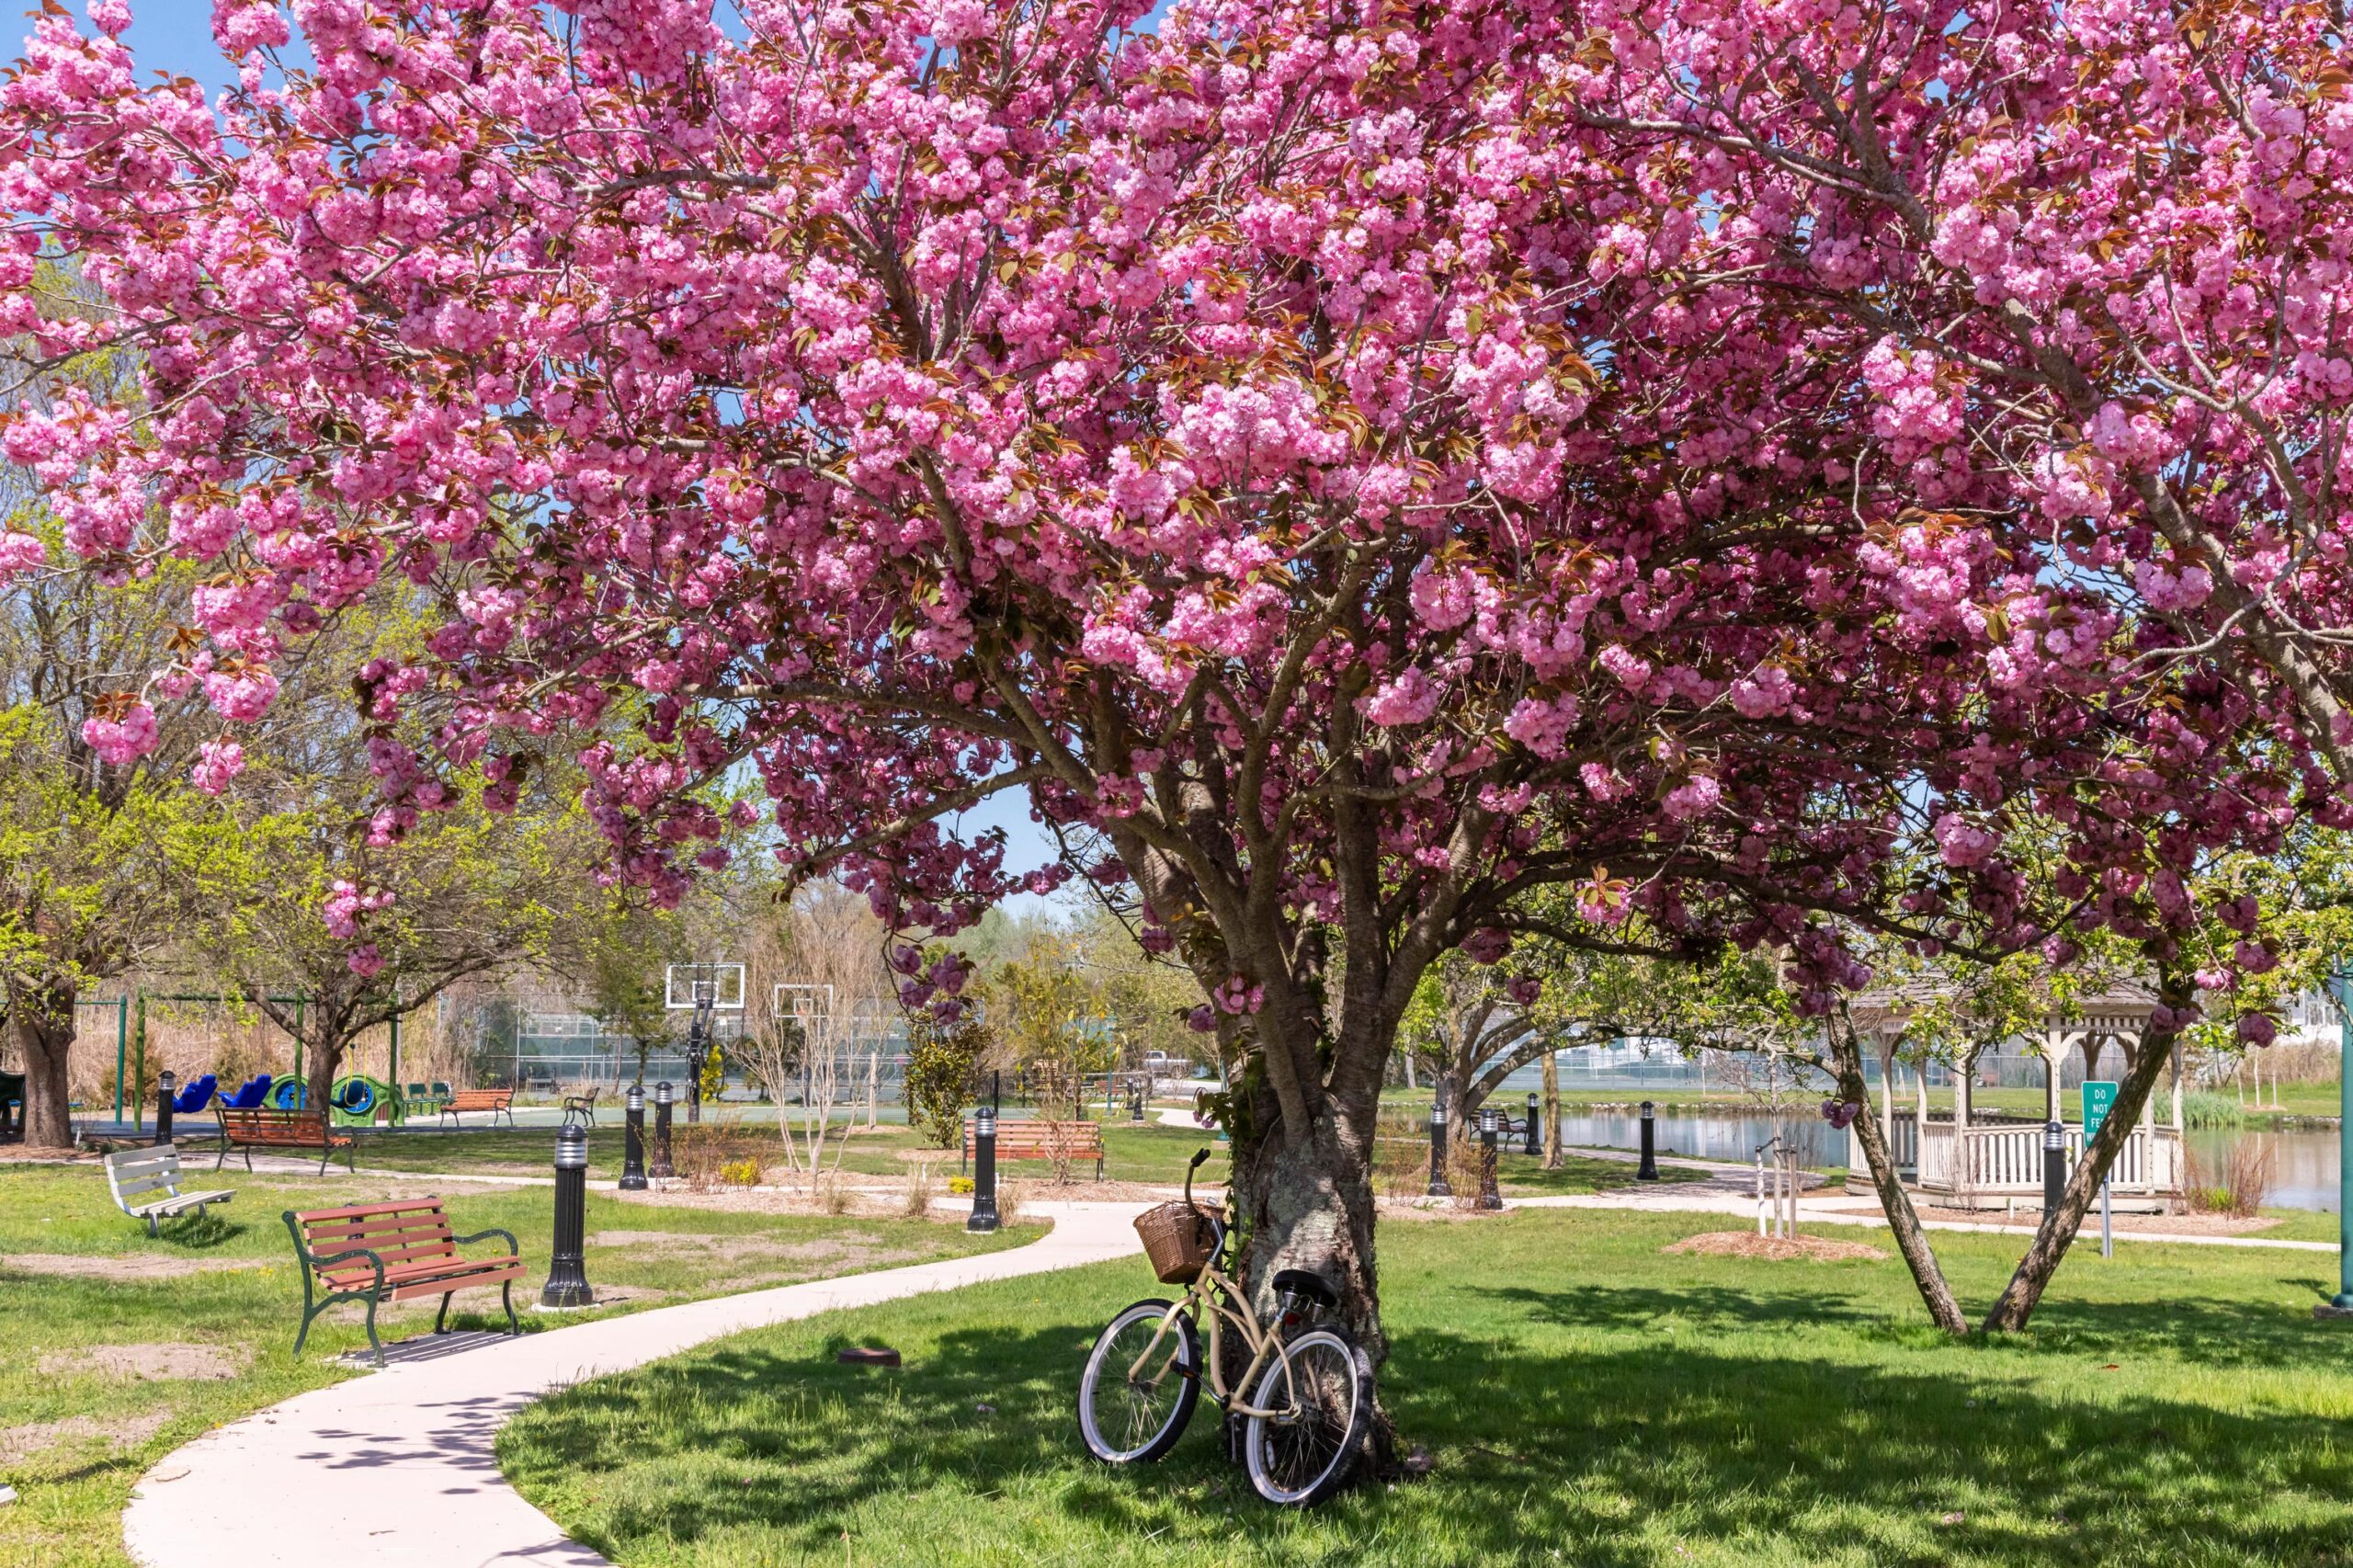 A yellow bike resting on a vibrant pink cherry blossom tree on a sunny day at Kiwanis Community Park.